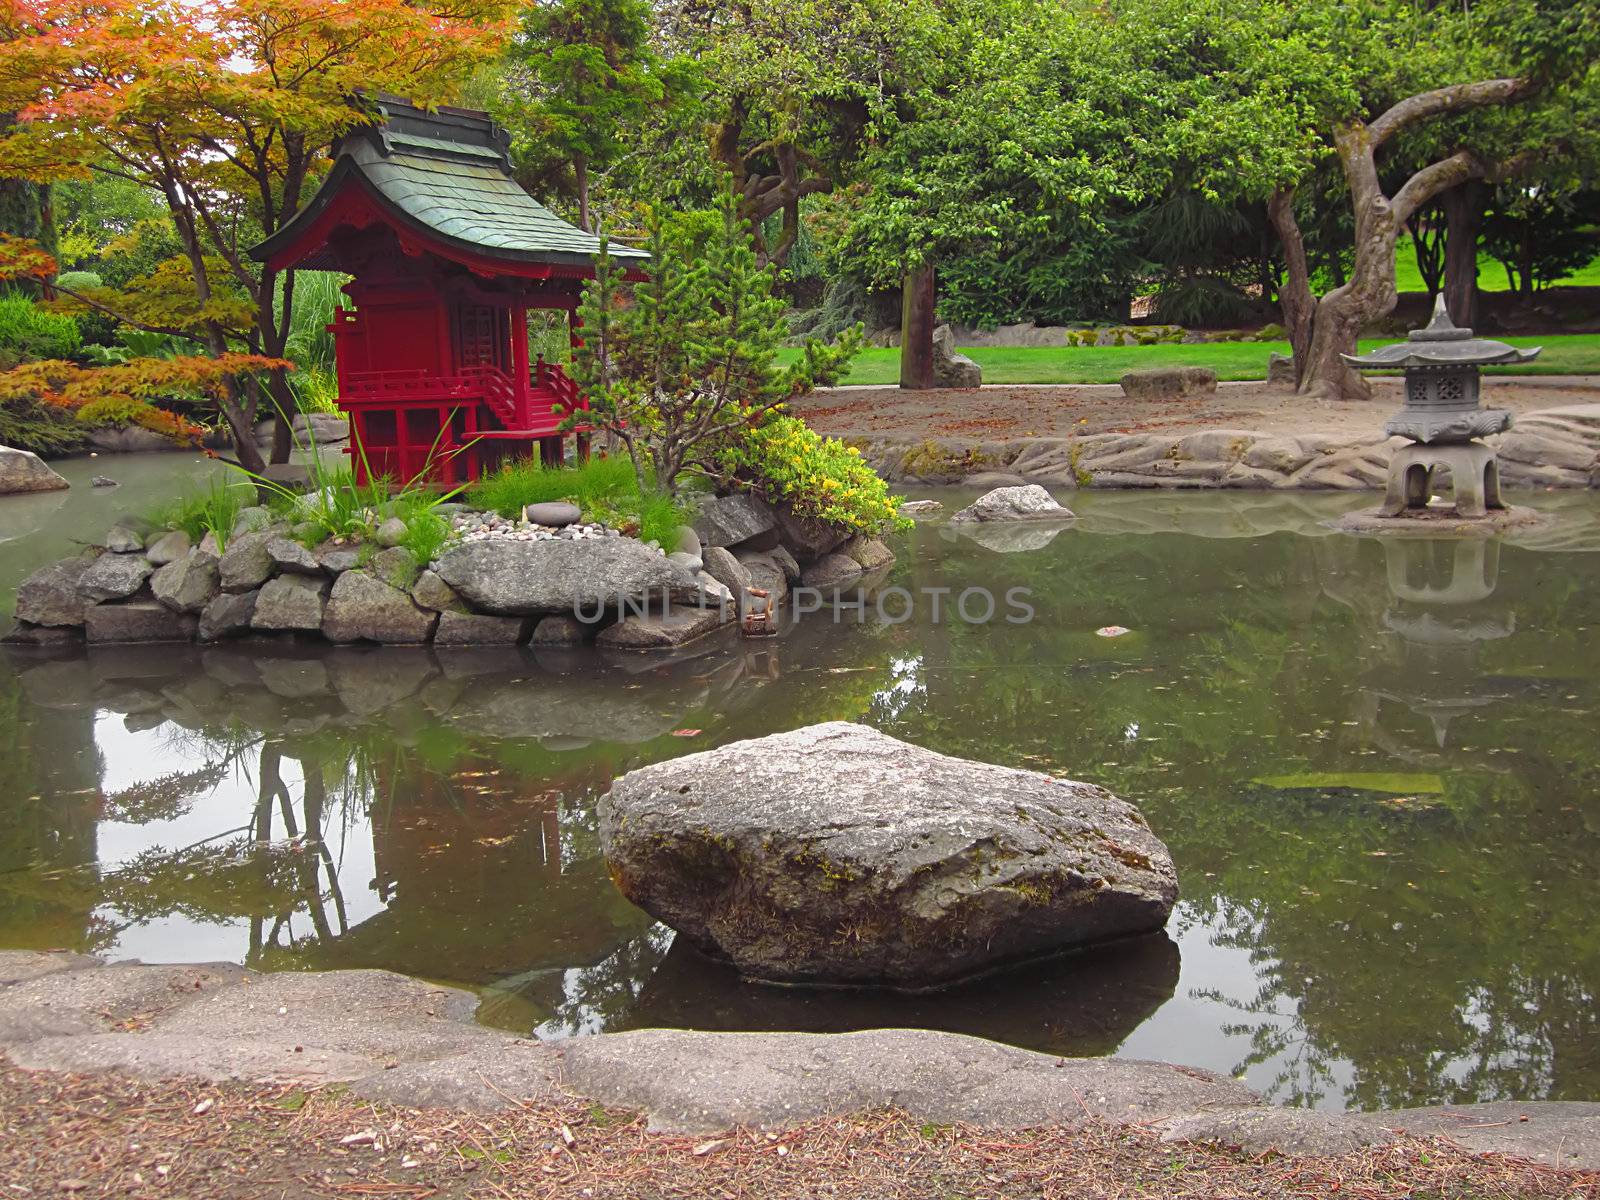 A photograph of an Asian style garden located at a public park.